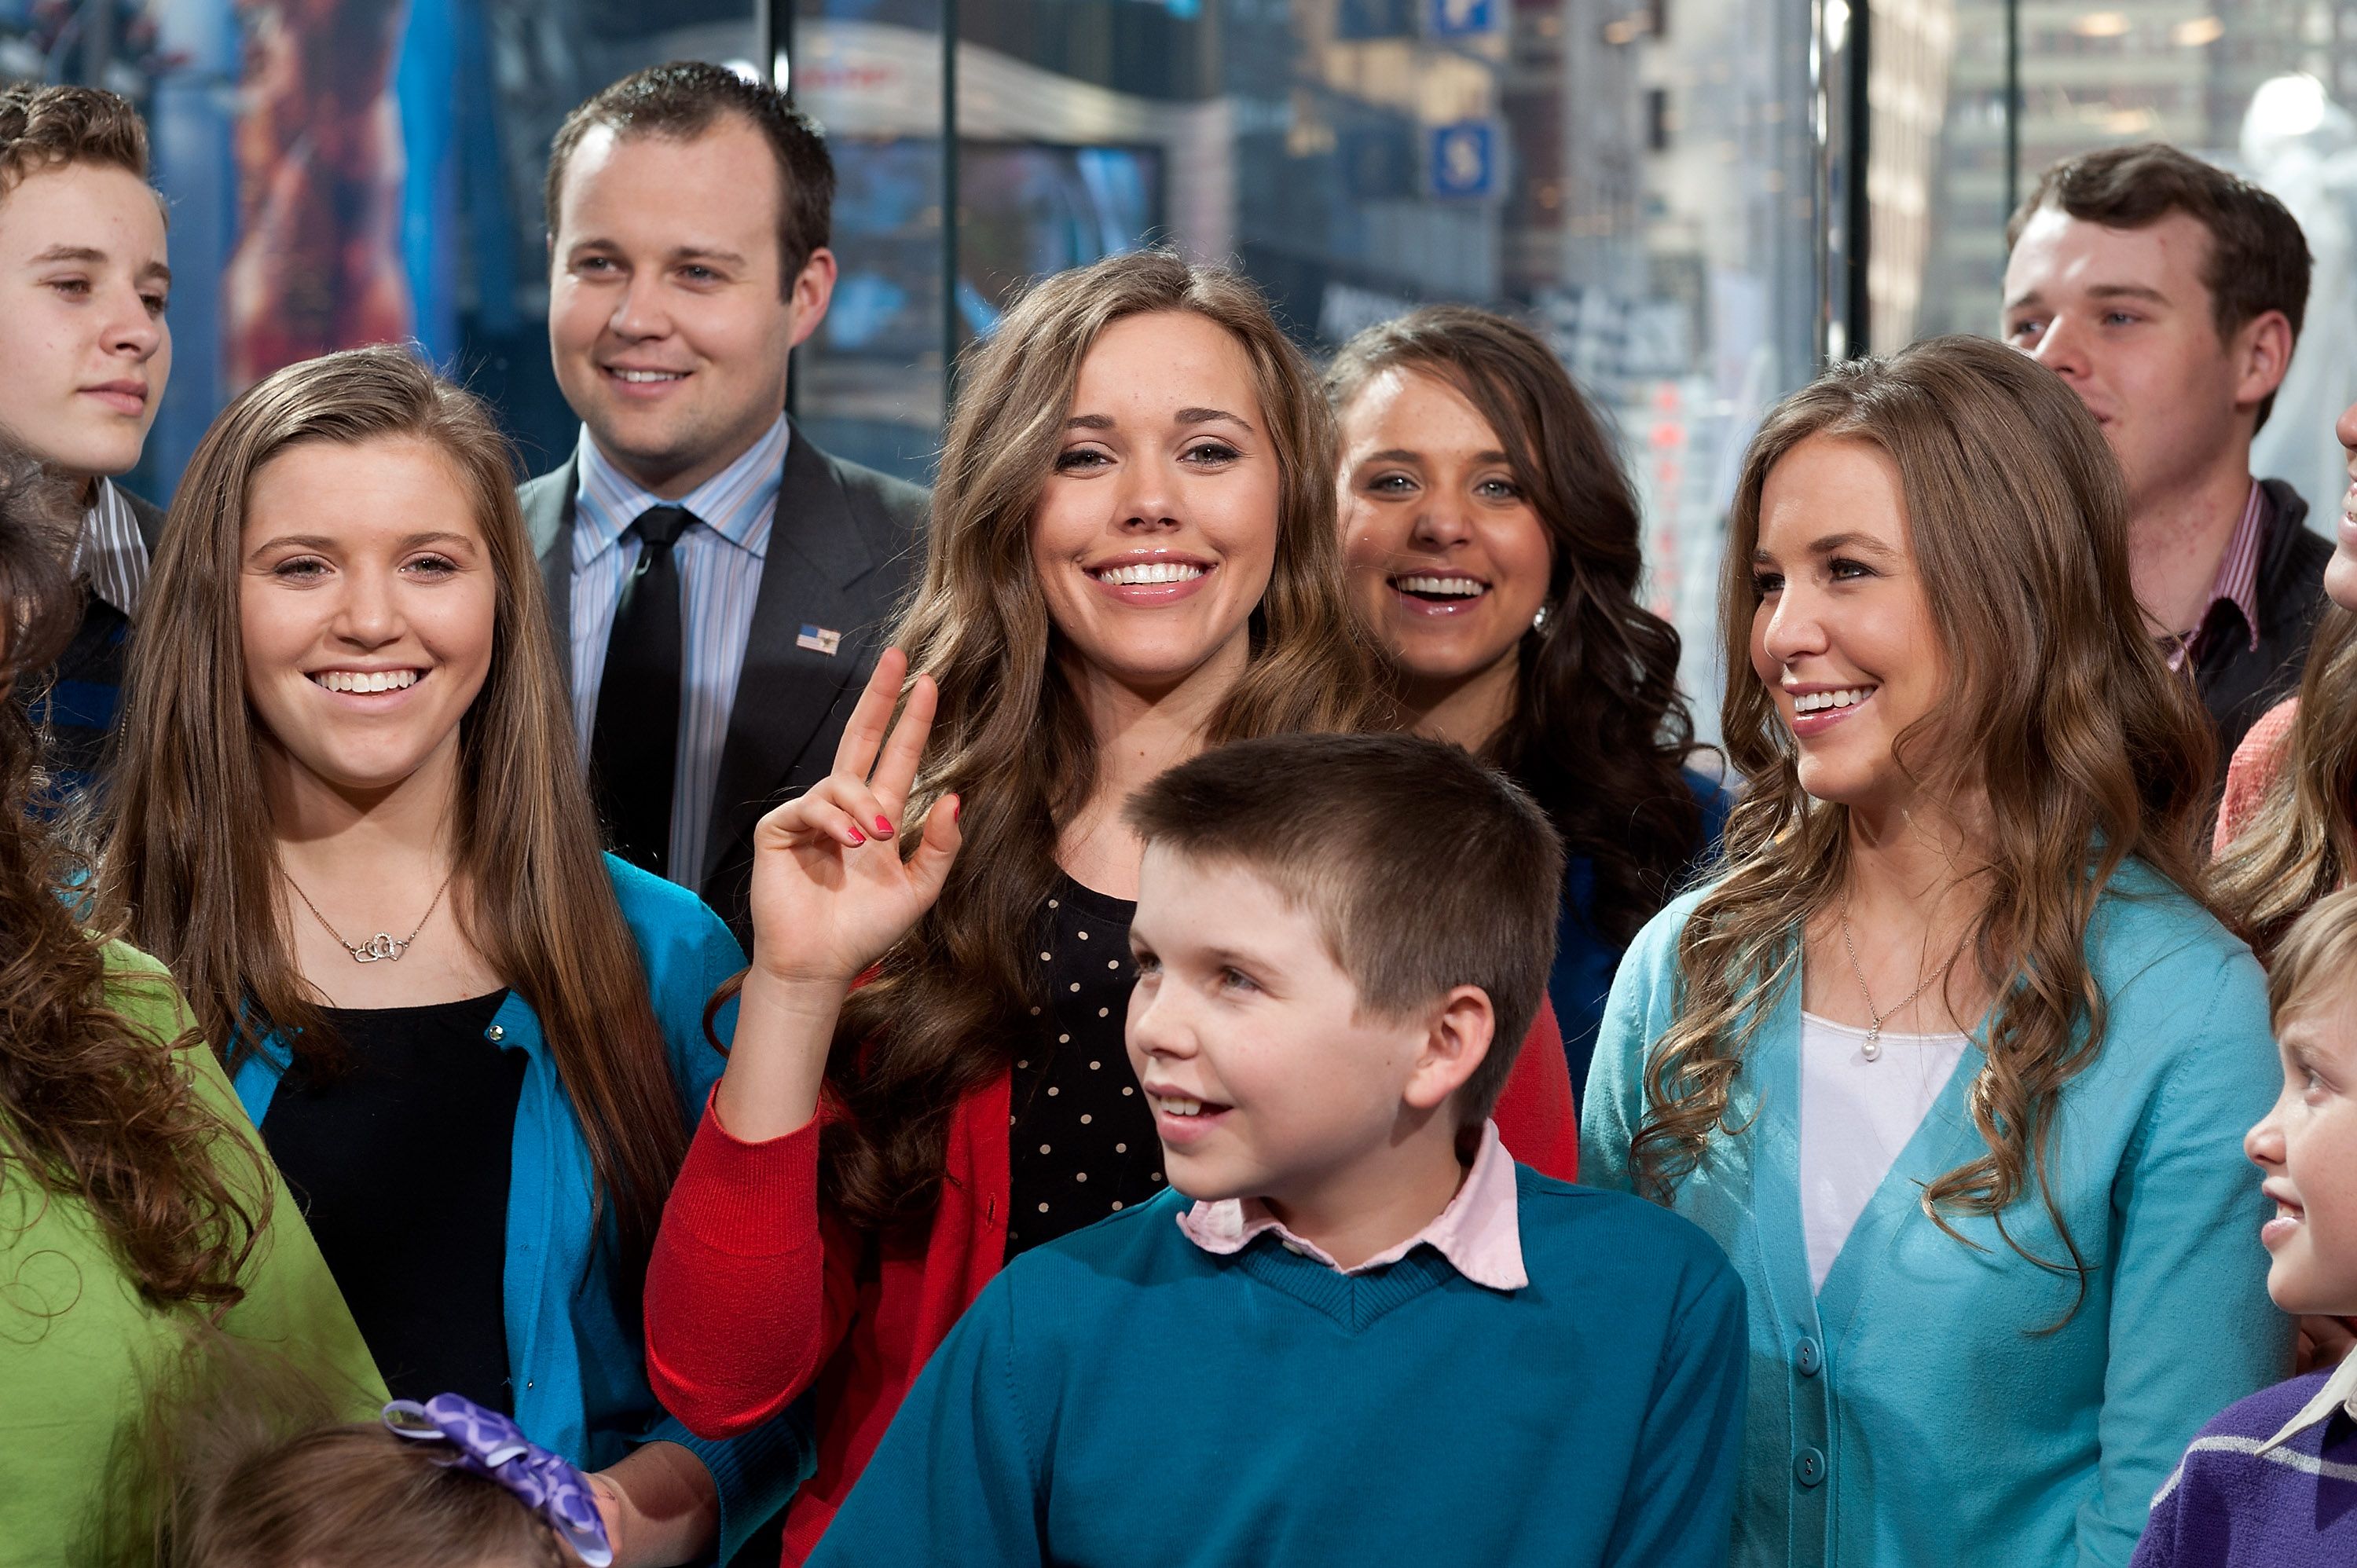 The Duggar family visits "Extra" at their New York studios in Times Square on March 11, 2014, in New York City | Photo: D. Dipasupil/Getty Images